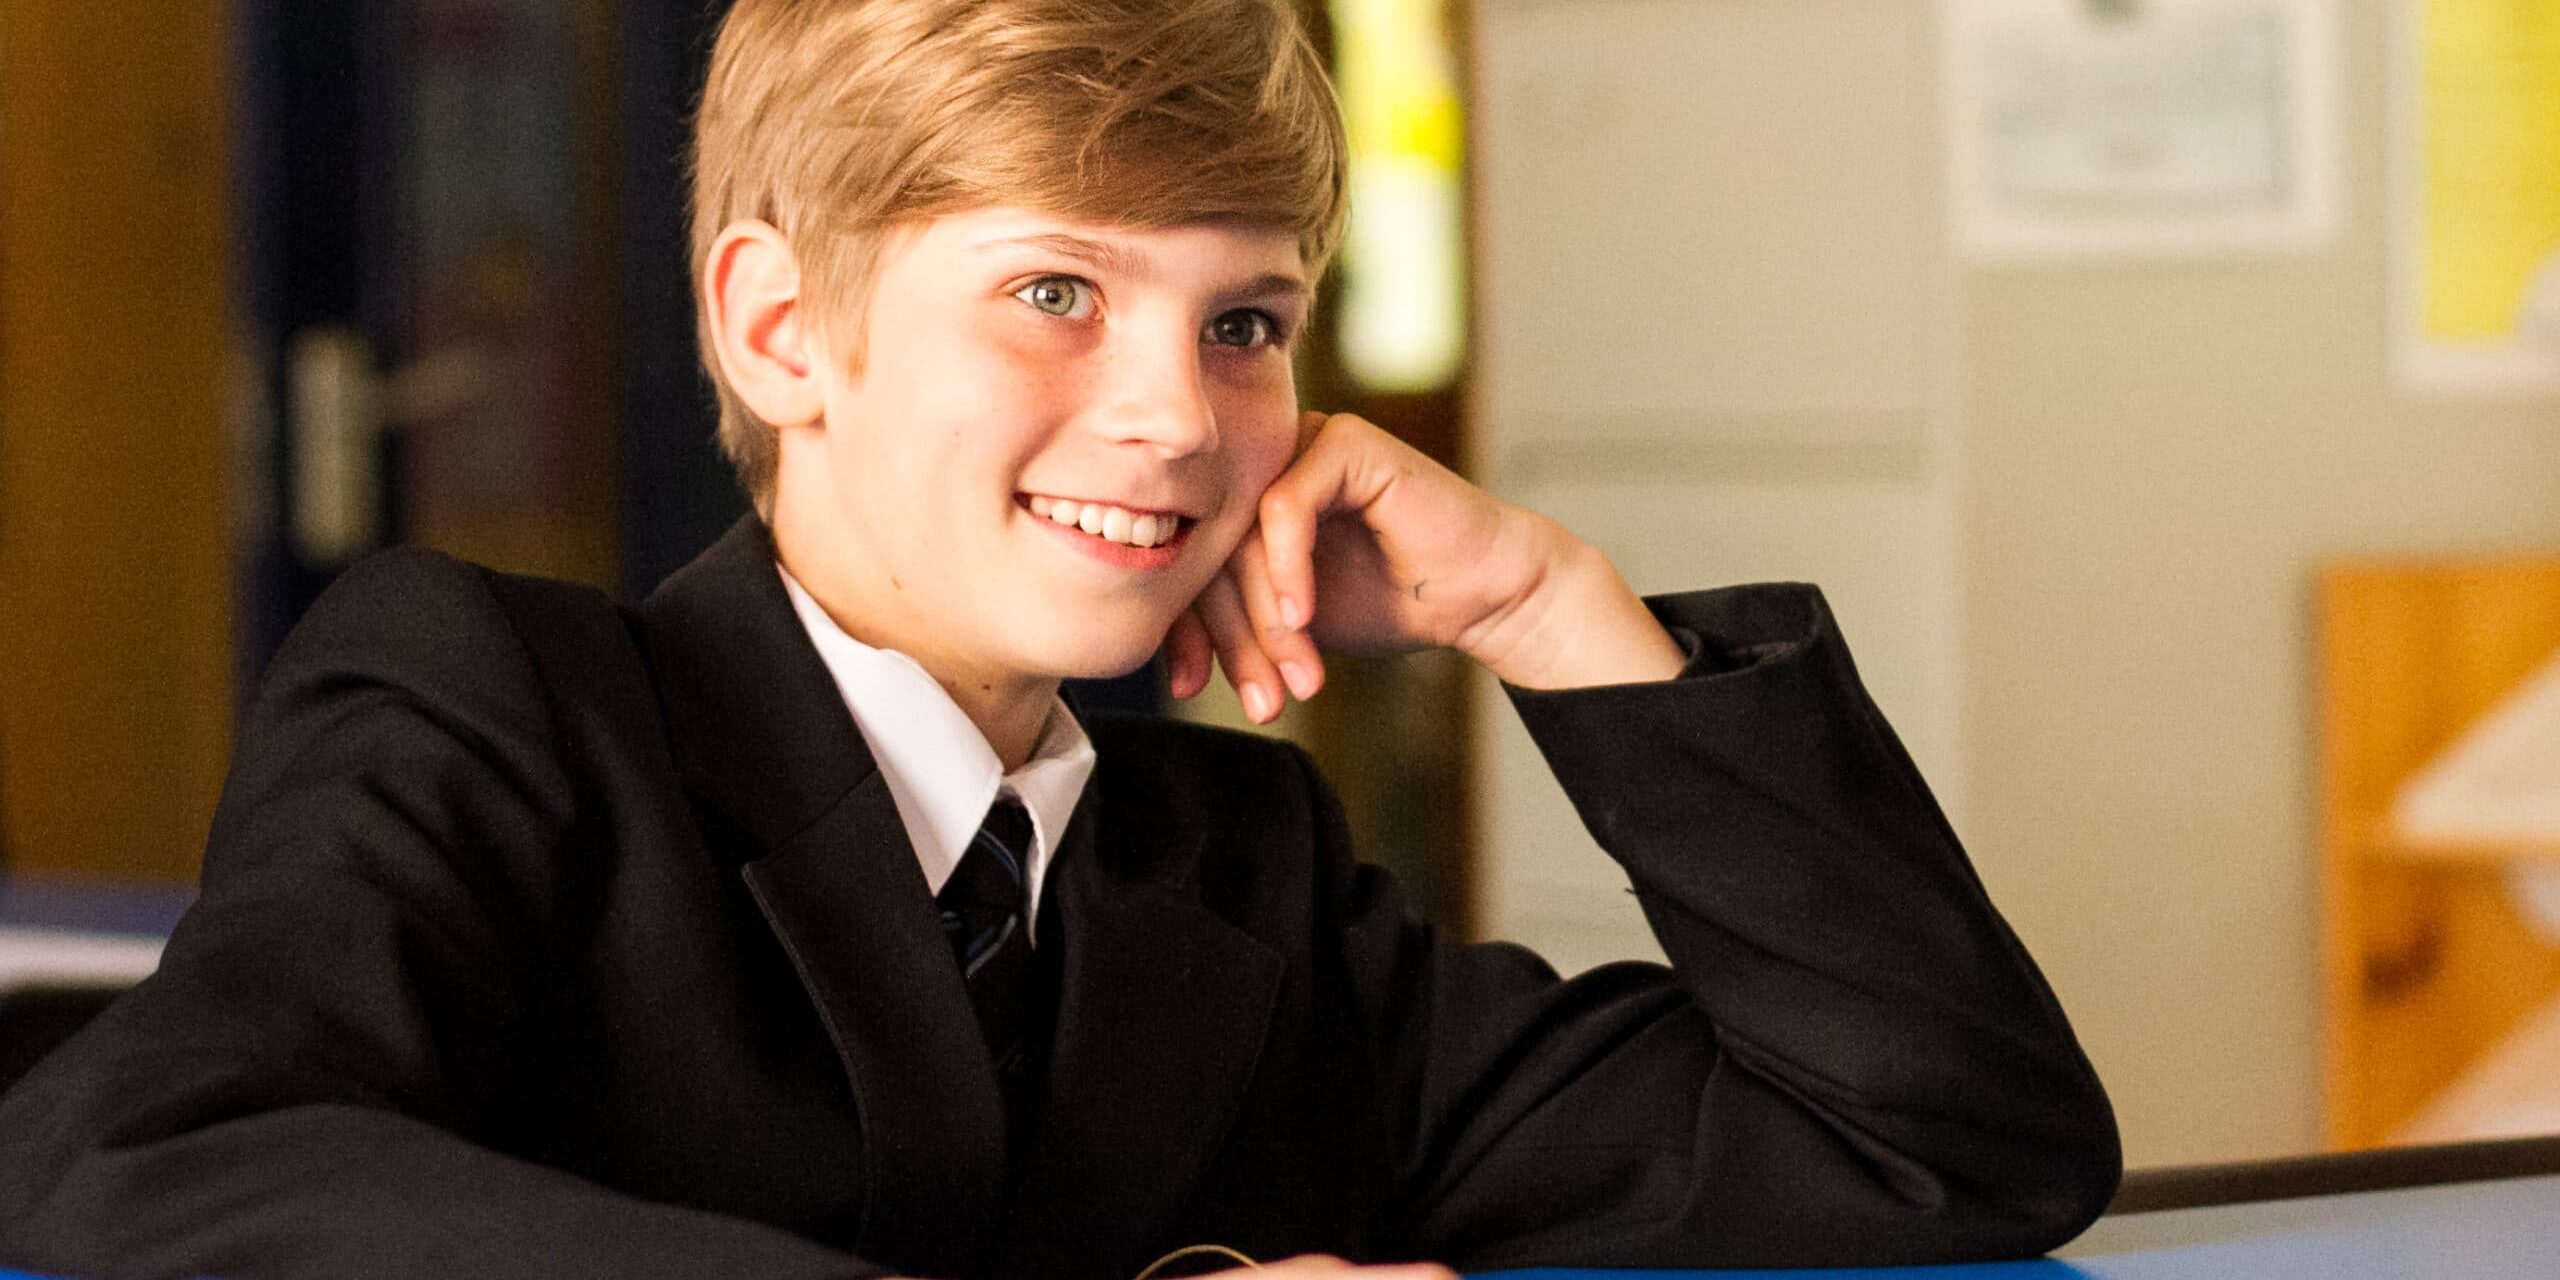 A boy in school uniform sitting at a table and smiling